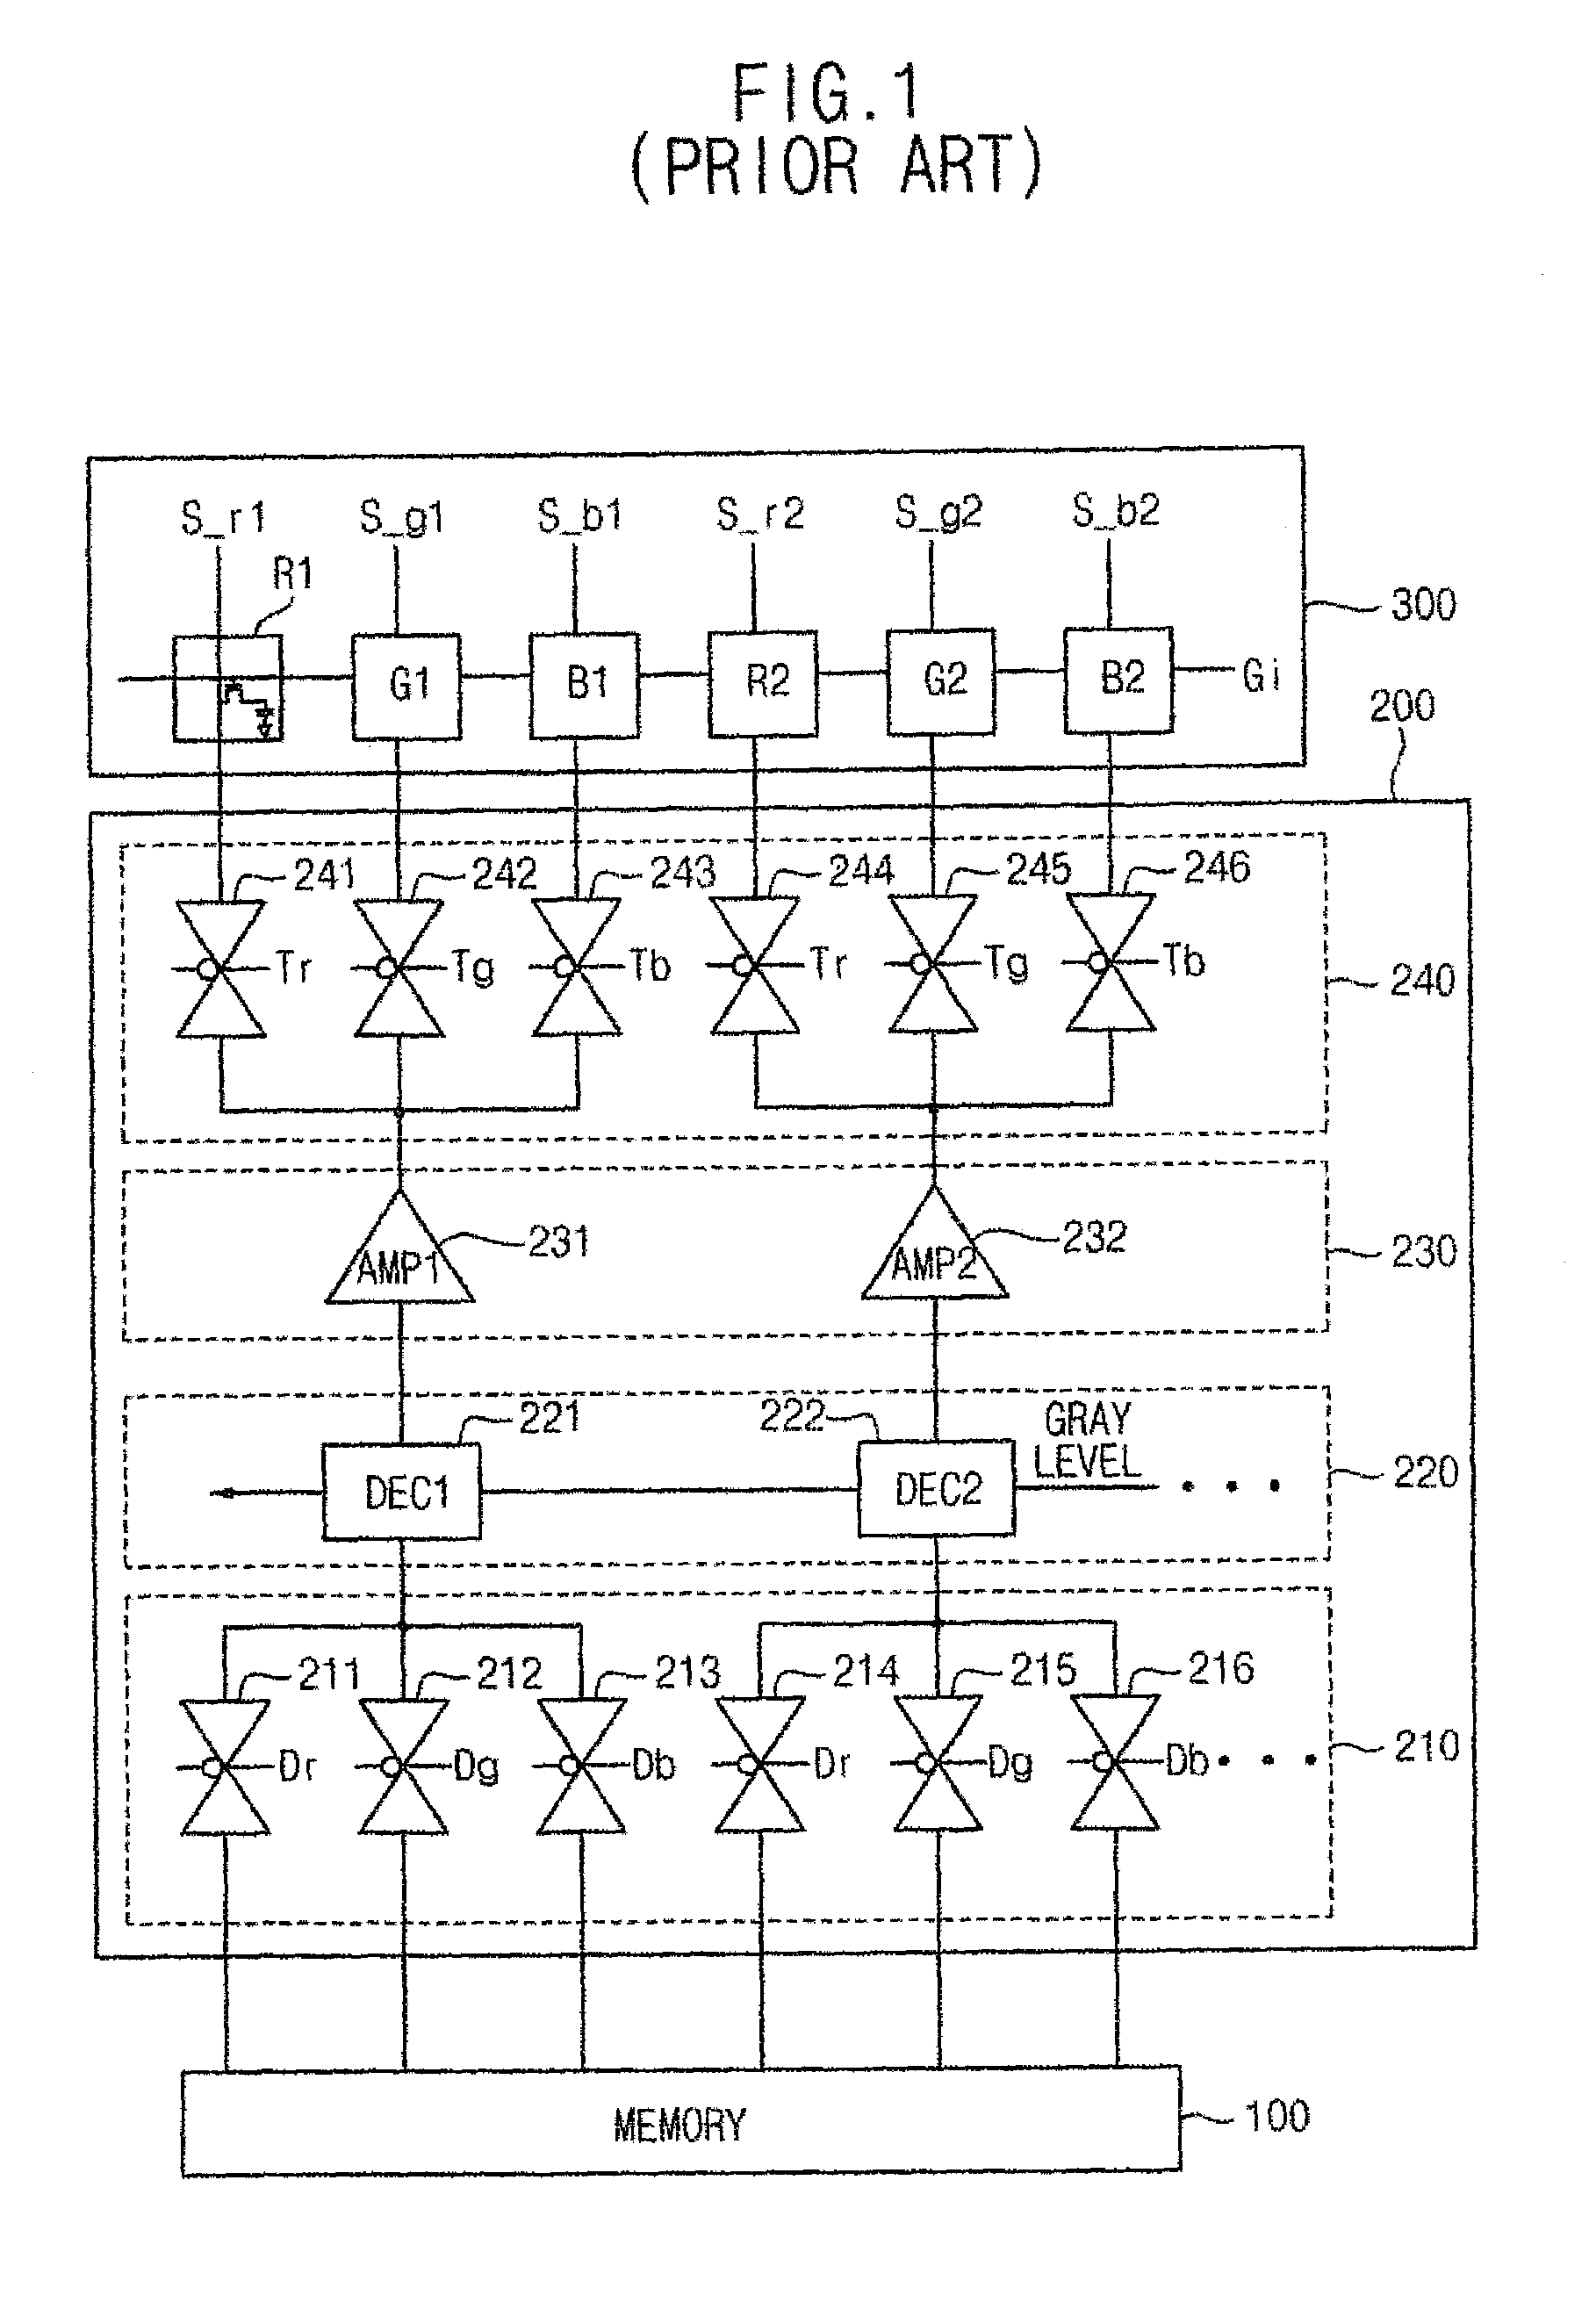 Method and circuit of selectively generating gray-scale voltage